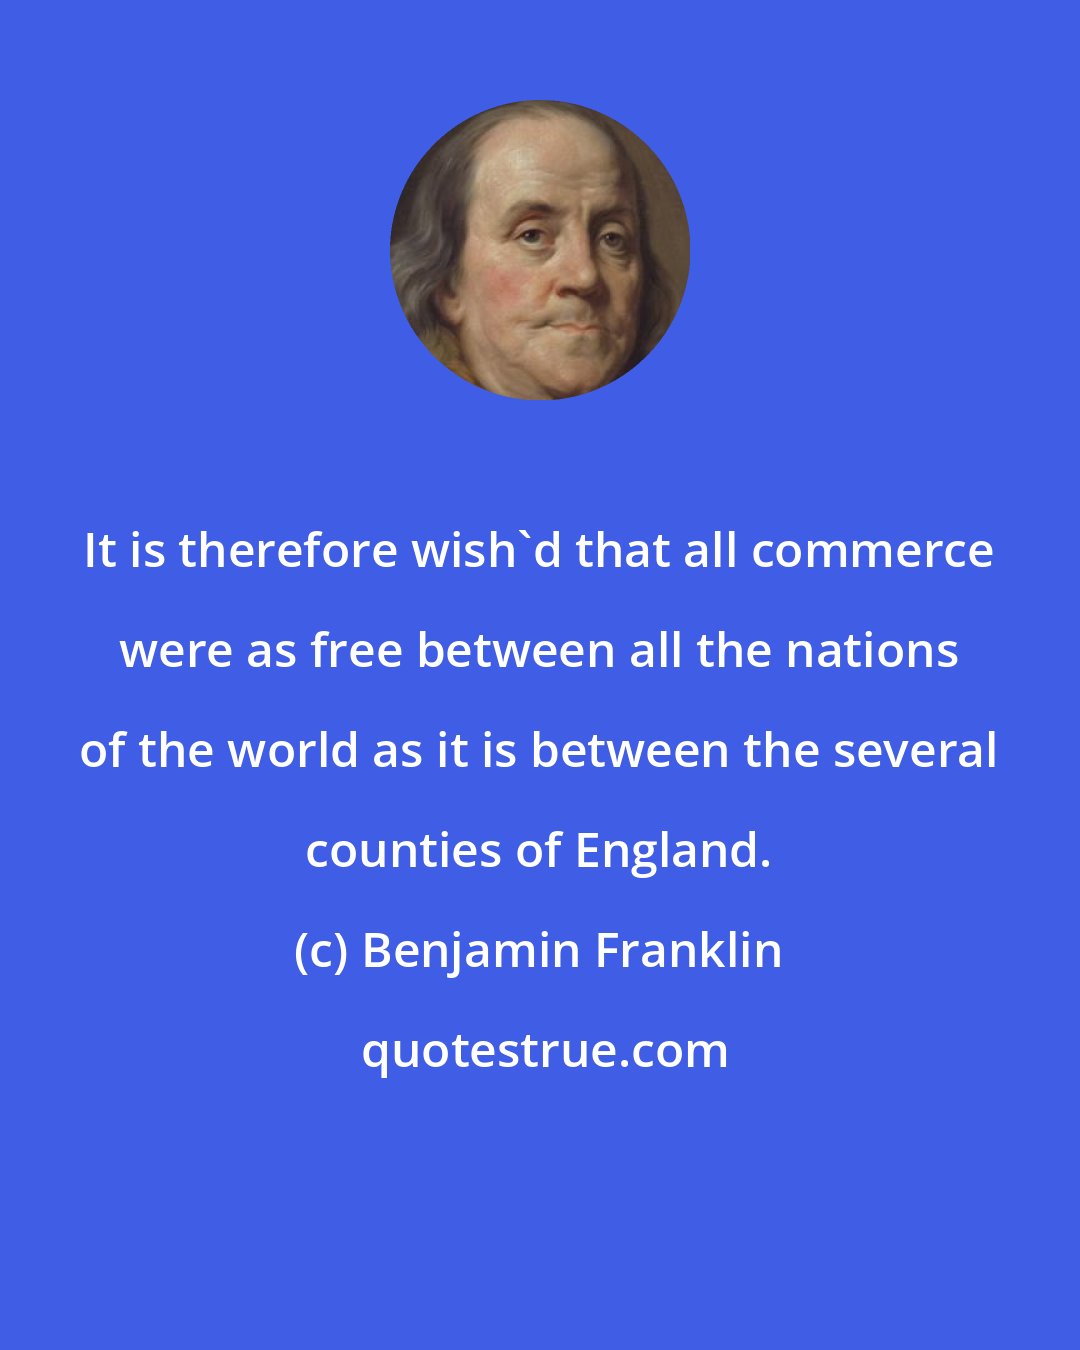 Benjamin Franklin: It is therefore wish'd that all commerce were as free between all the nations of the world as it is between the several counties of England.